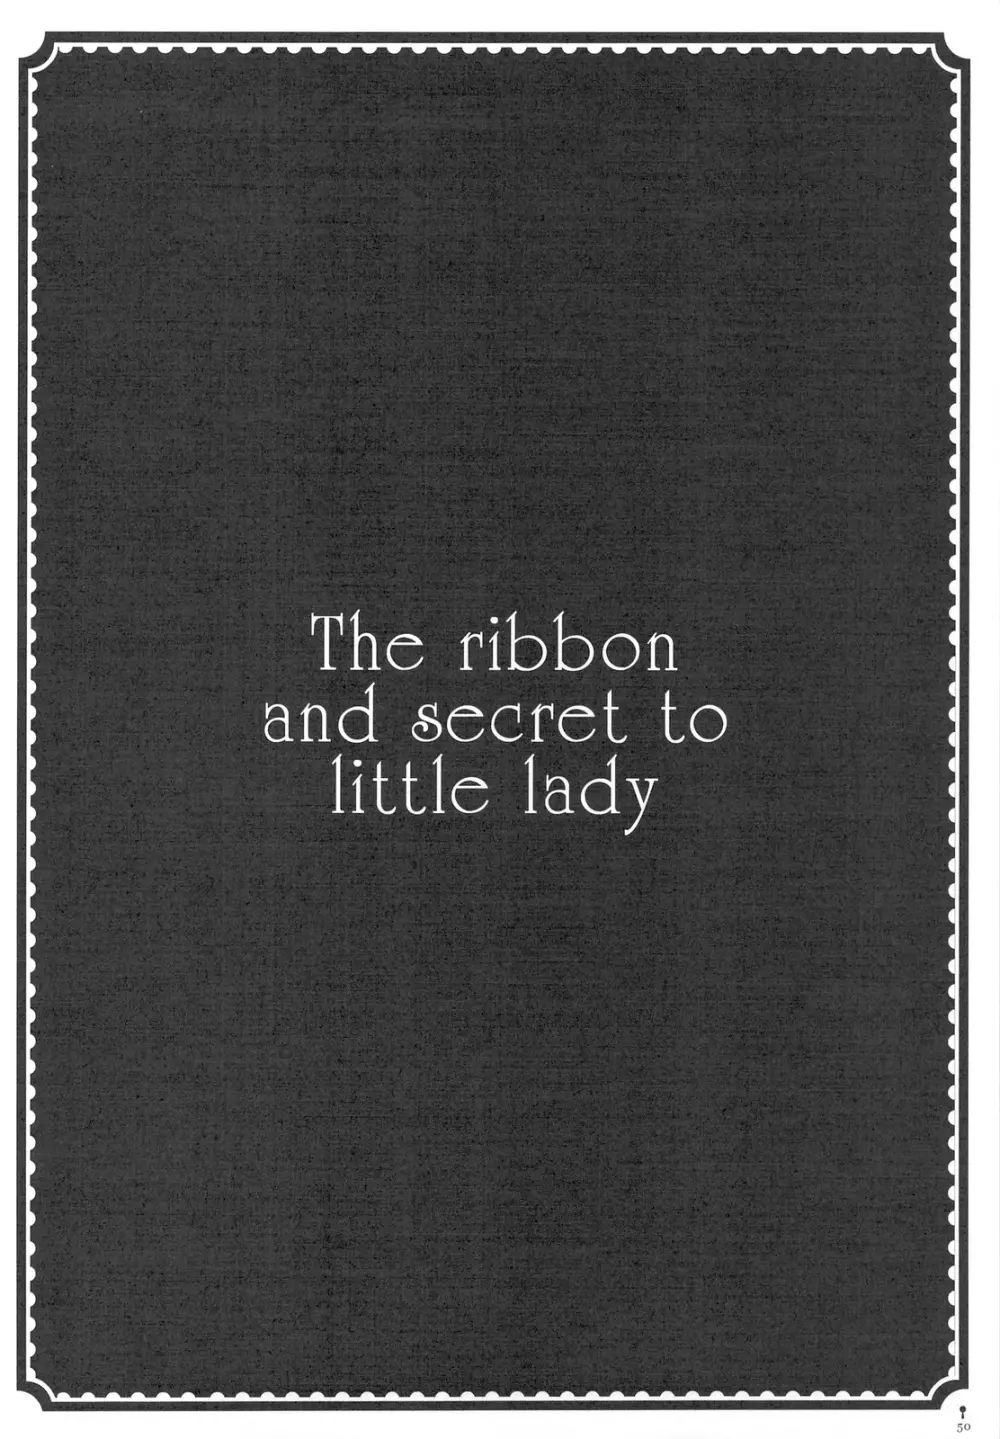 The ribbon and secret to little lady 52ページ